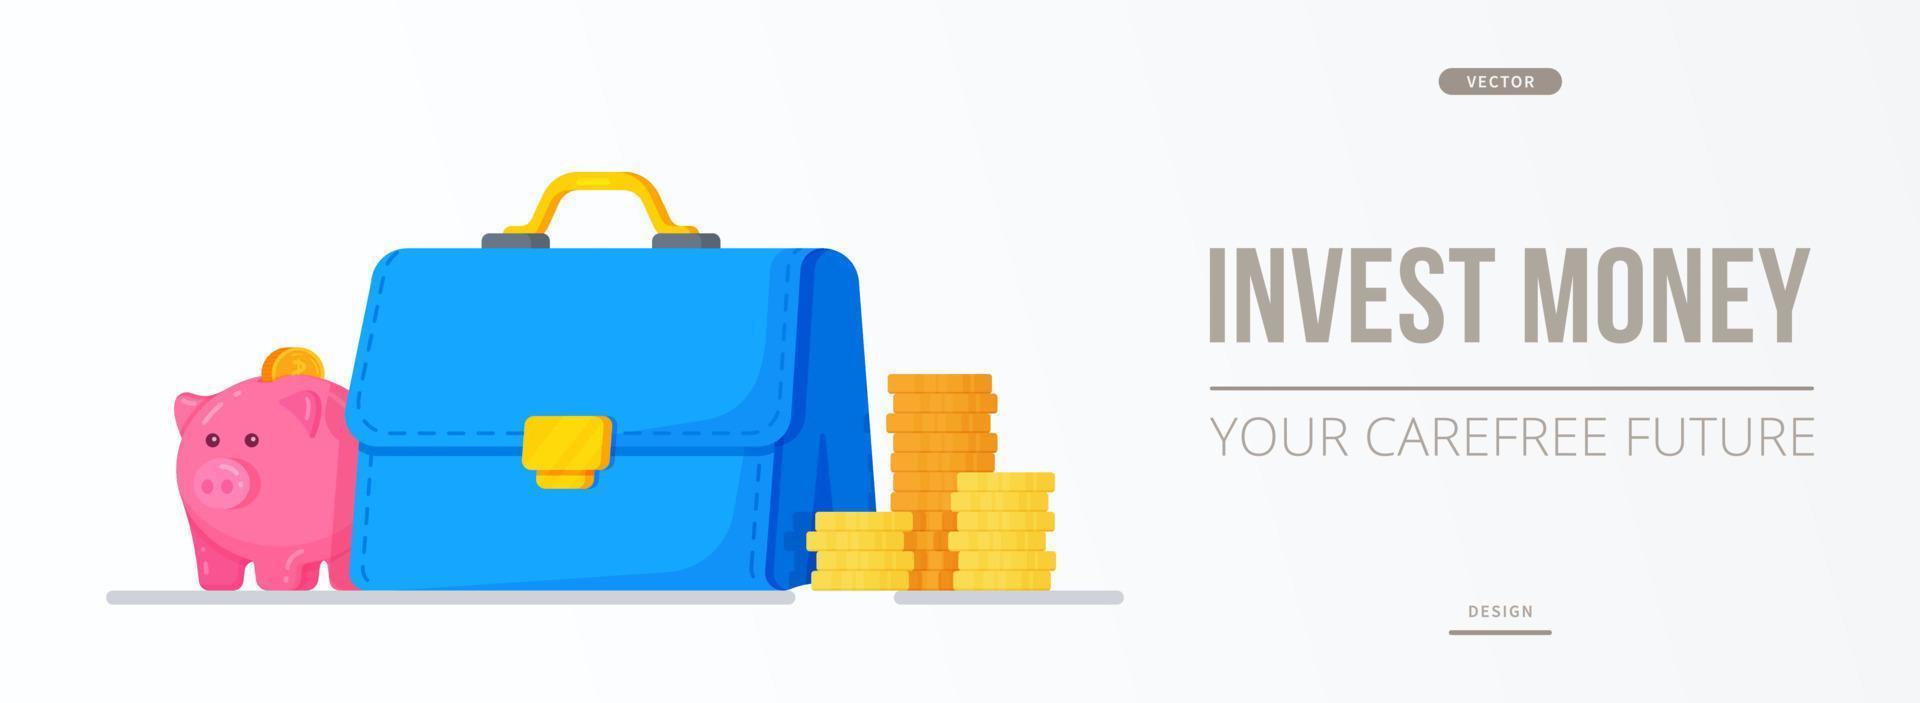 Vector illustration of invest money. The concept of investing money in business.